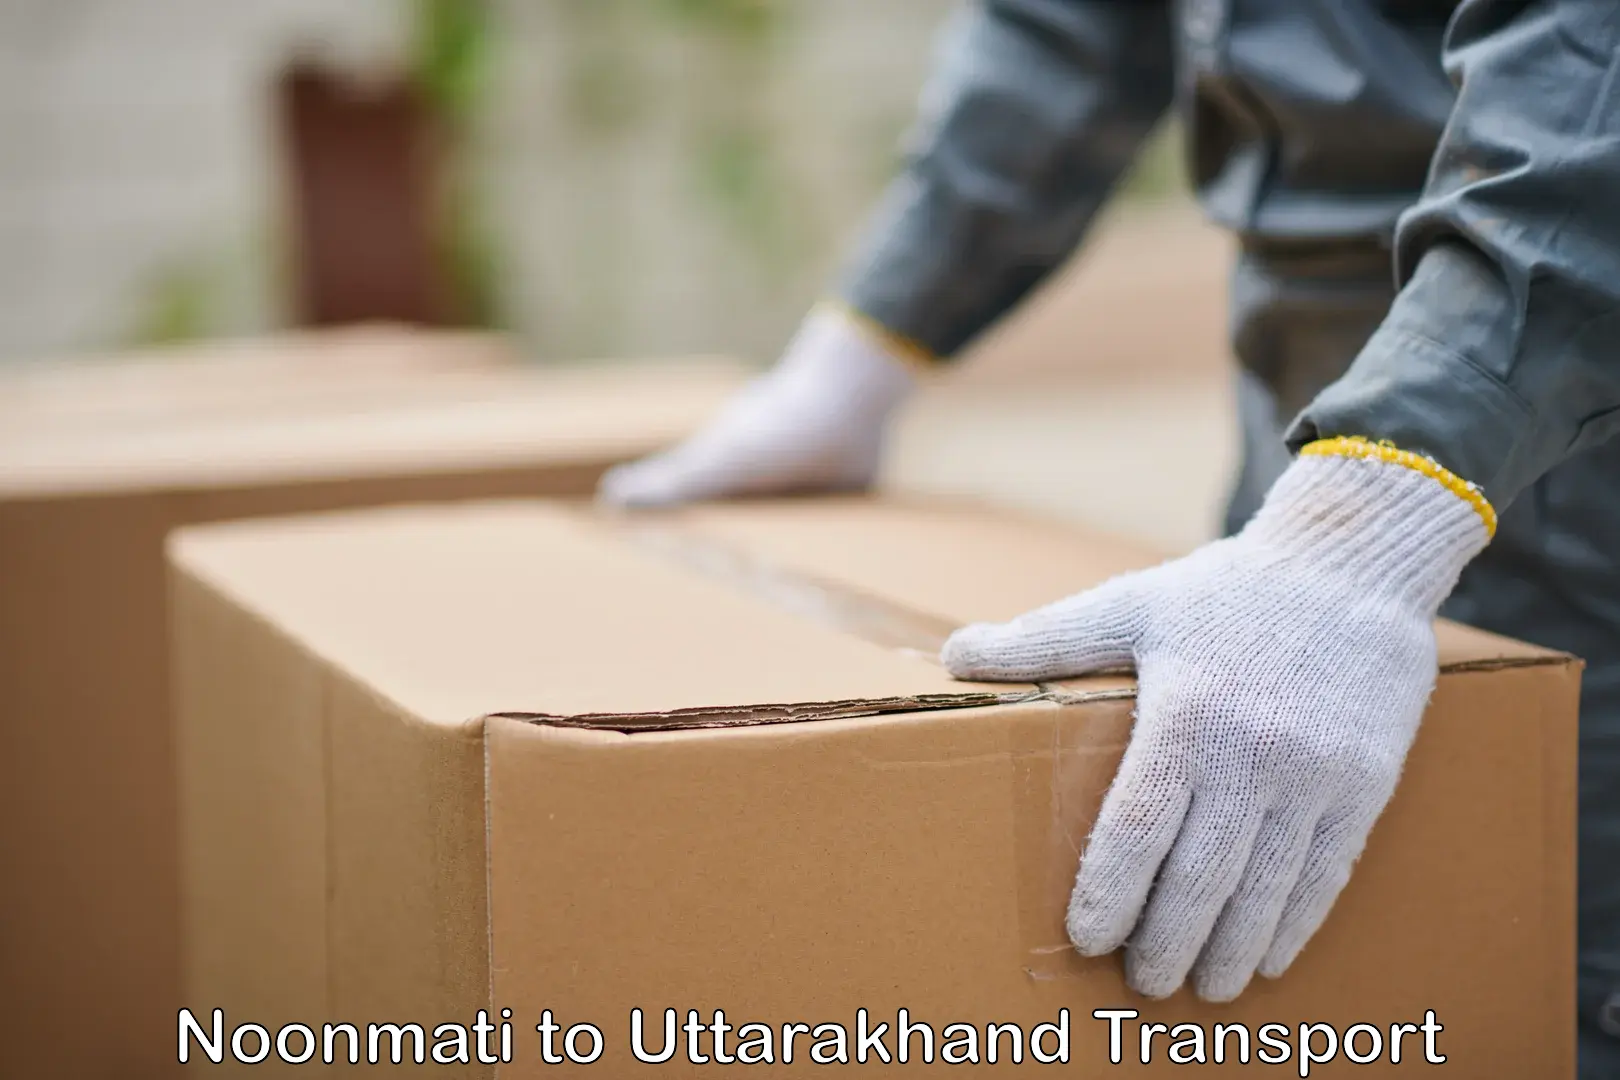 Truck transport companies in India Noonmati to Doiwala